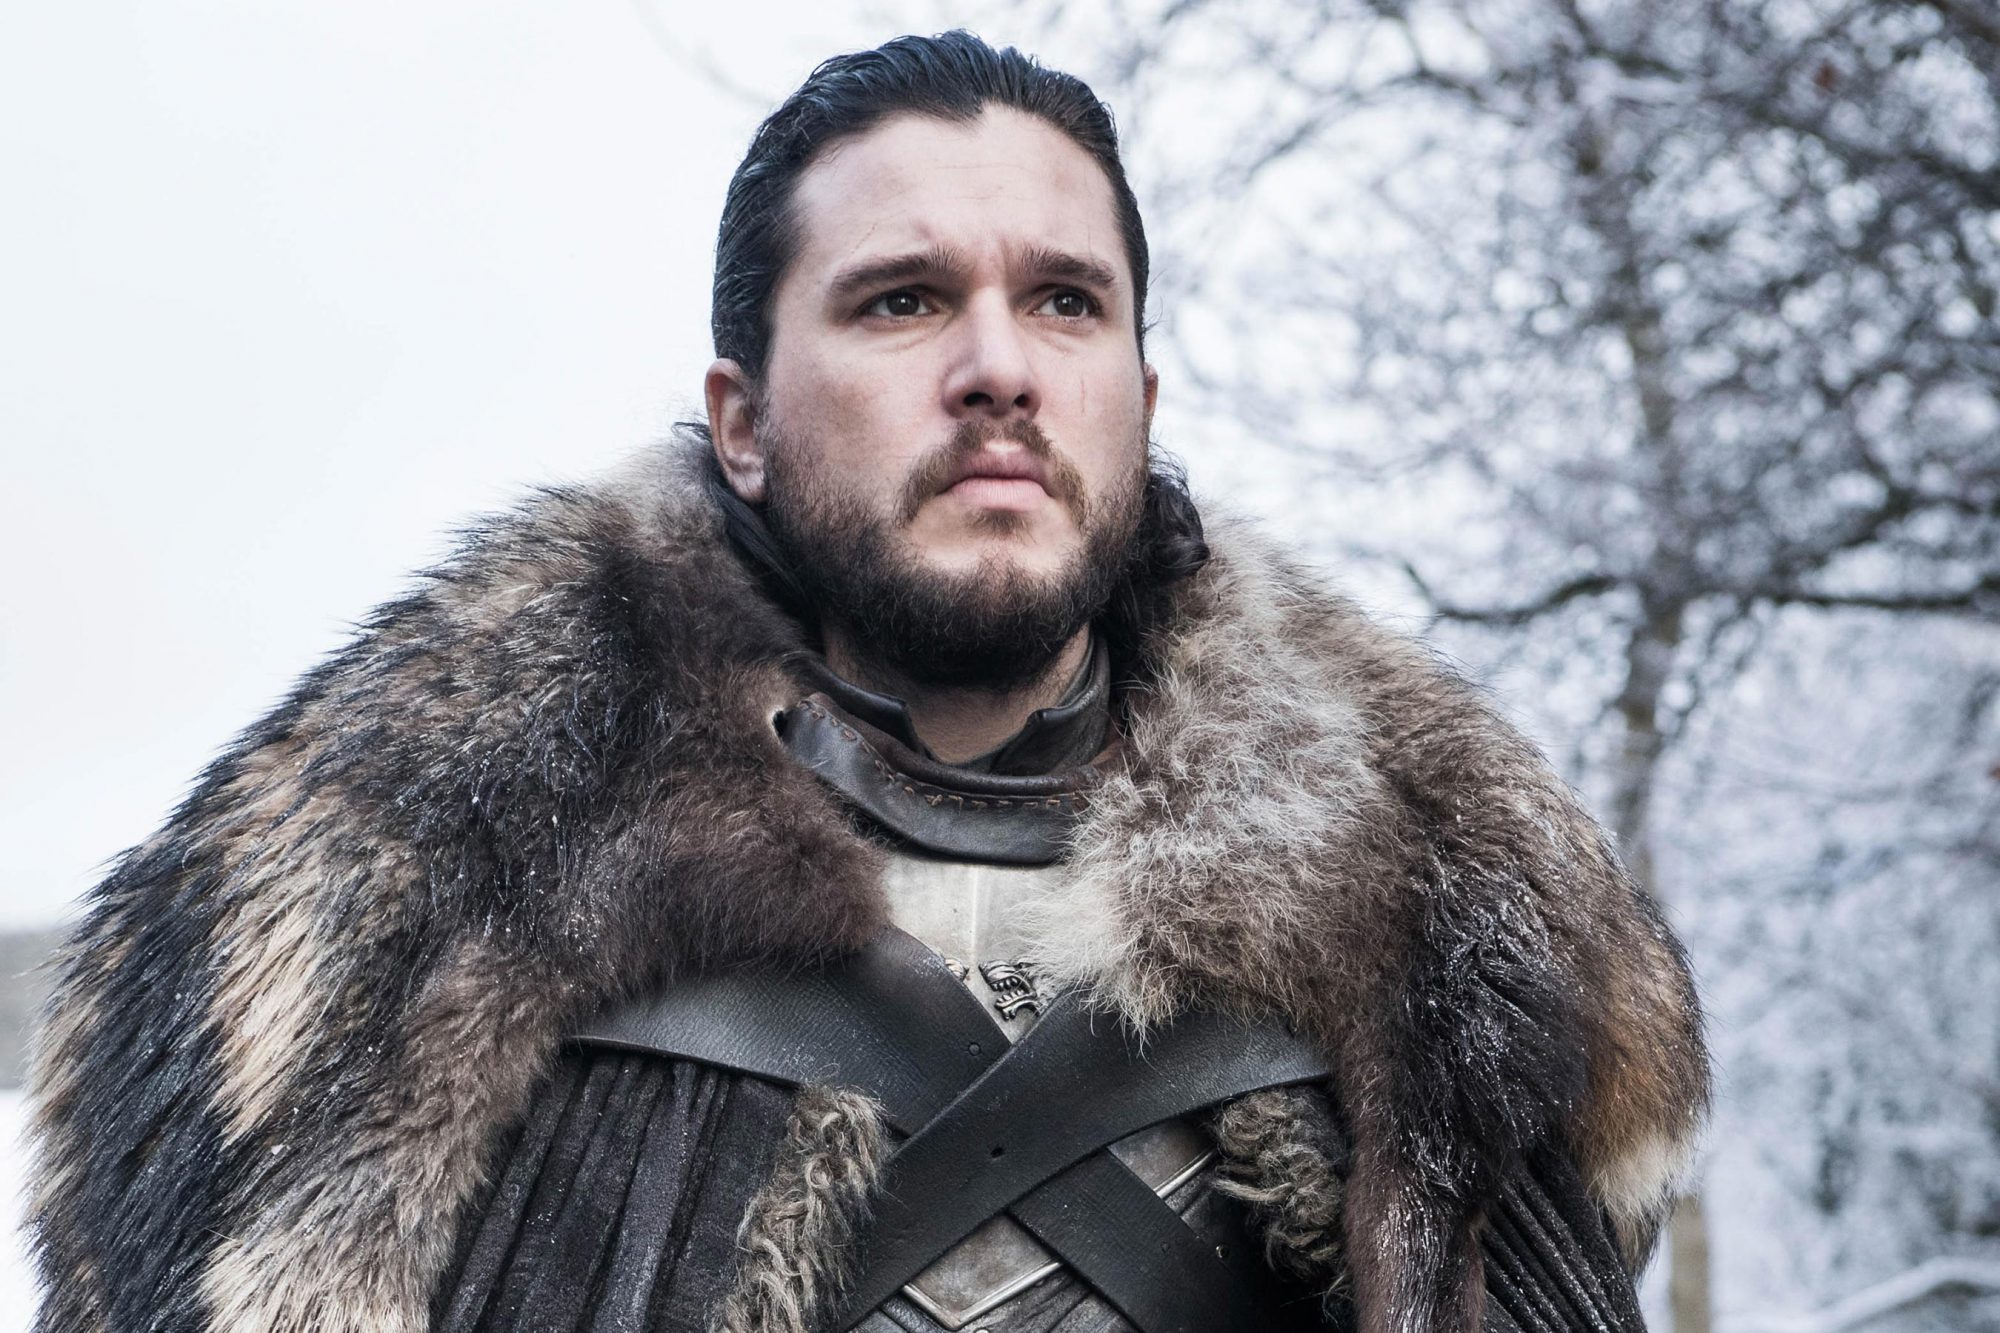 HBO announces ‘Game of Thrones’ Jon Snow spin-off series